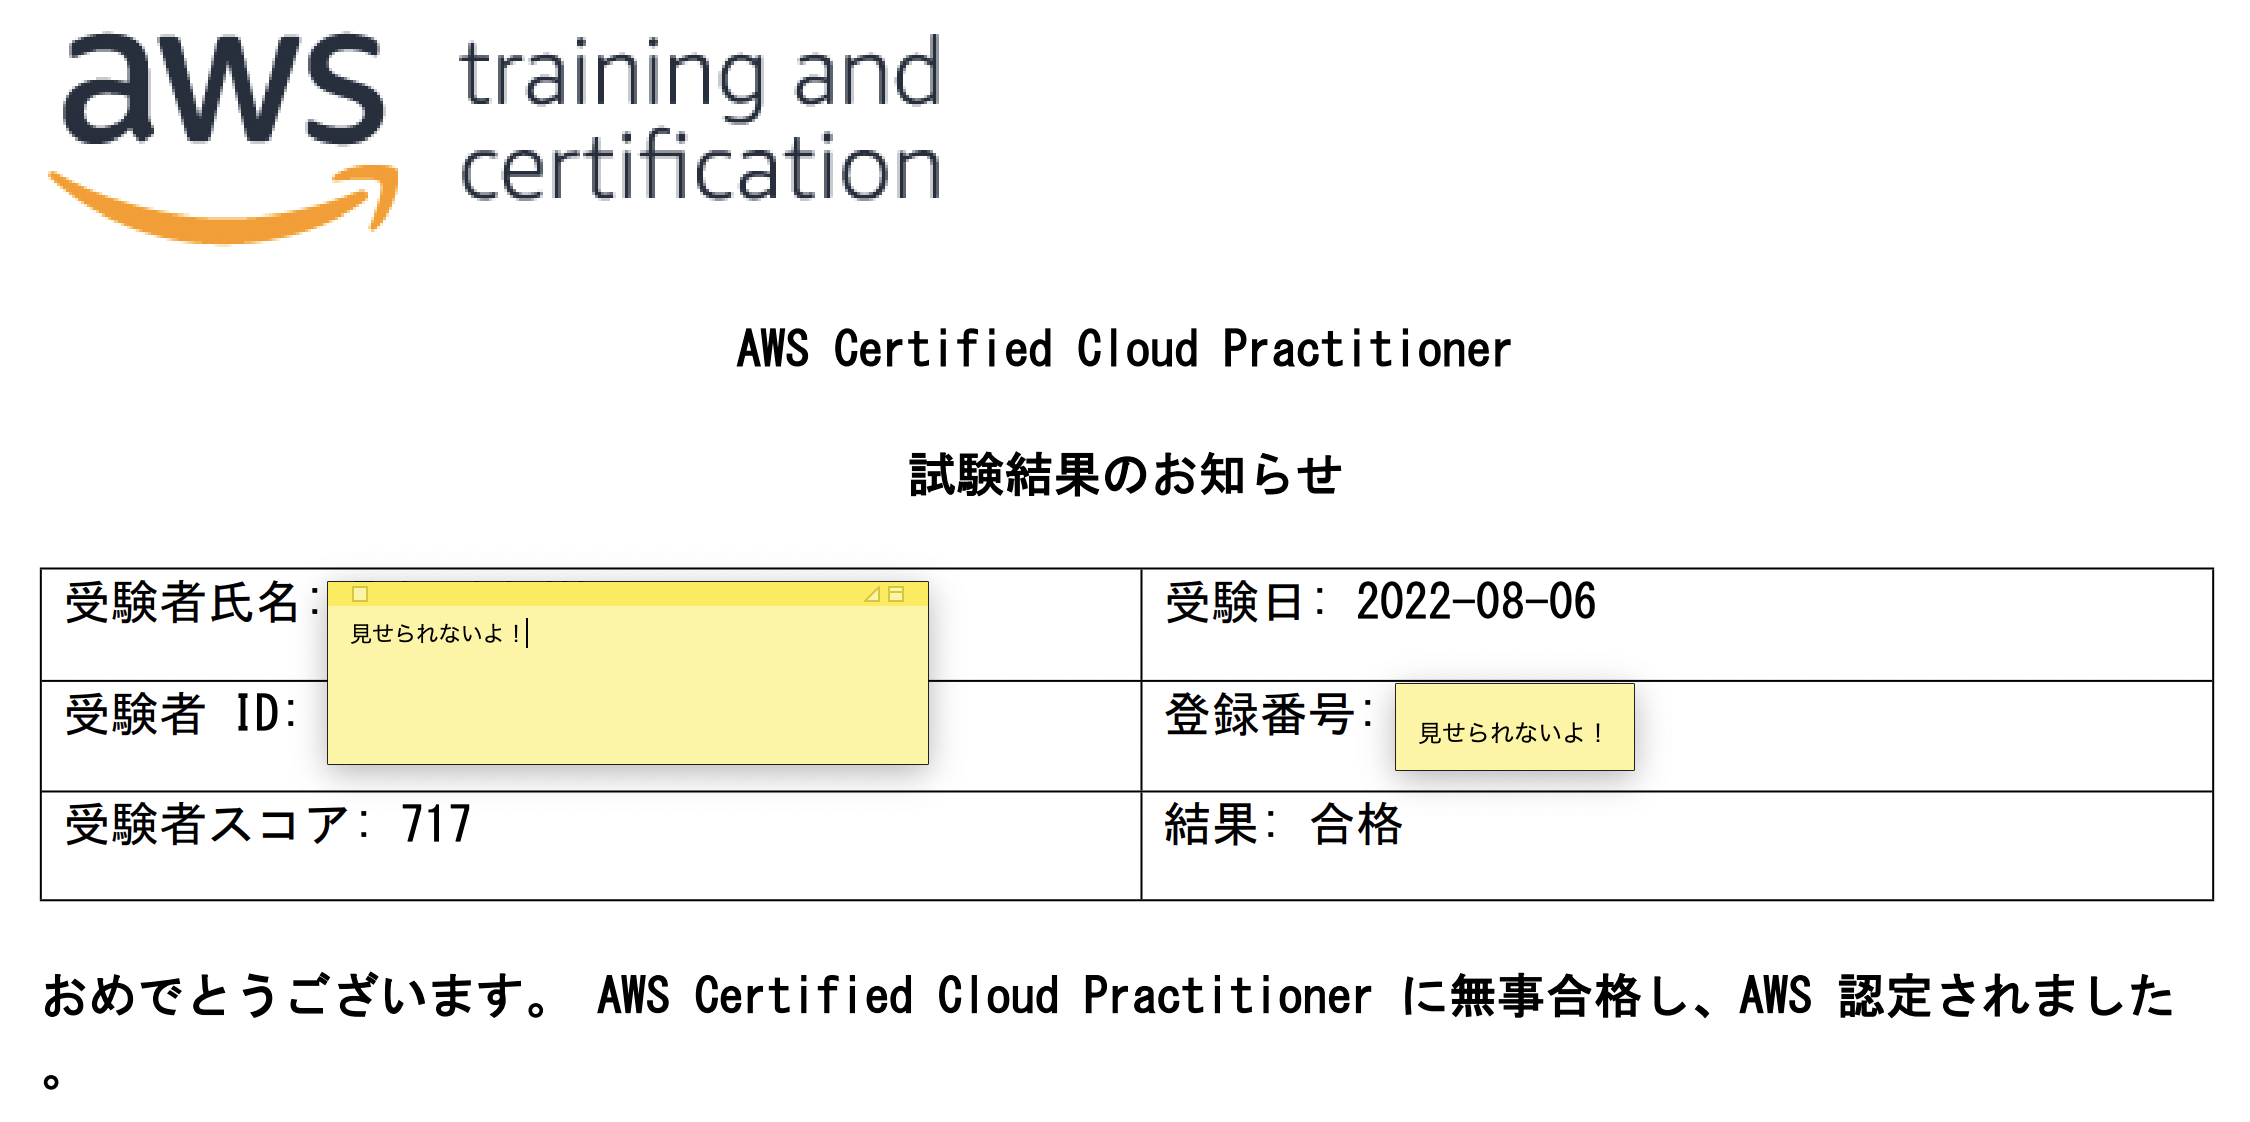 【AWS】AWS Cloud Practitoiner 受けてきました...!